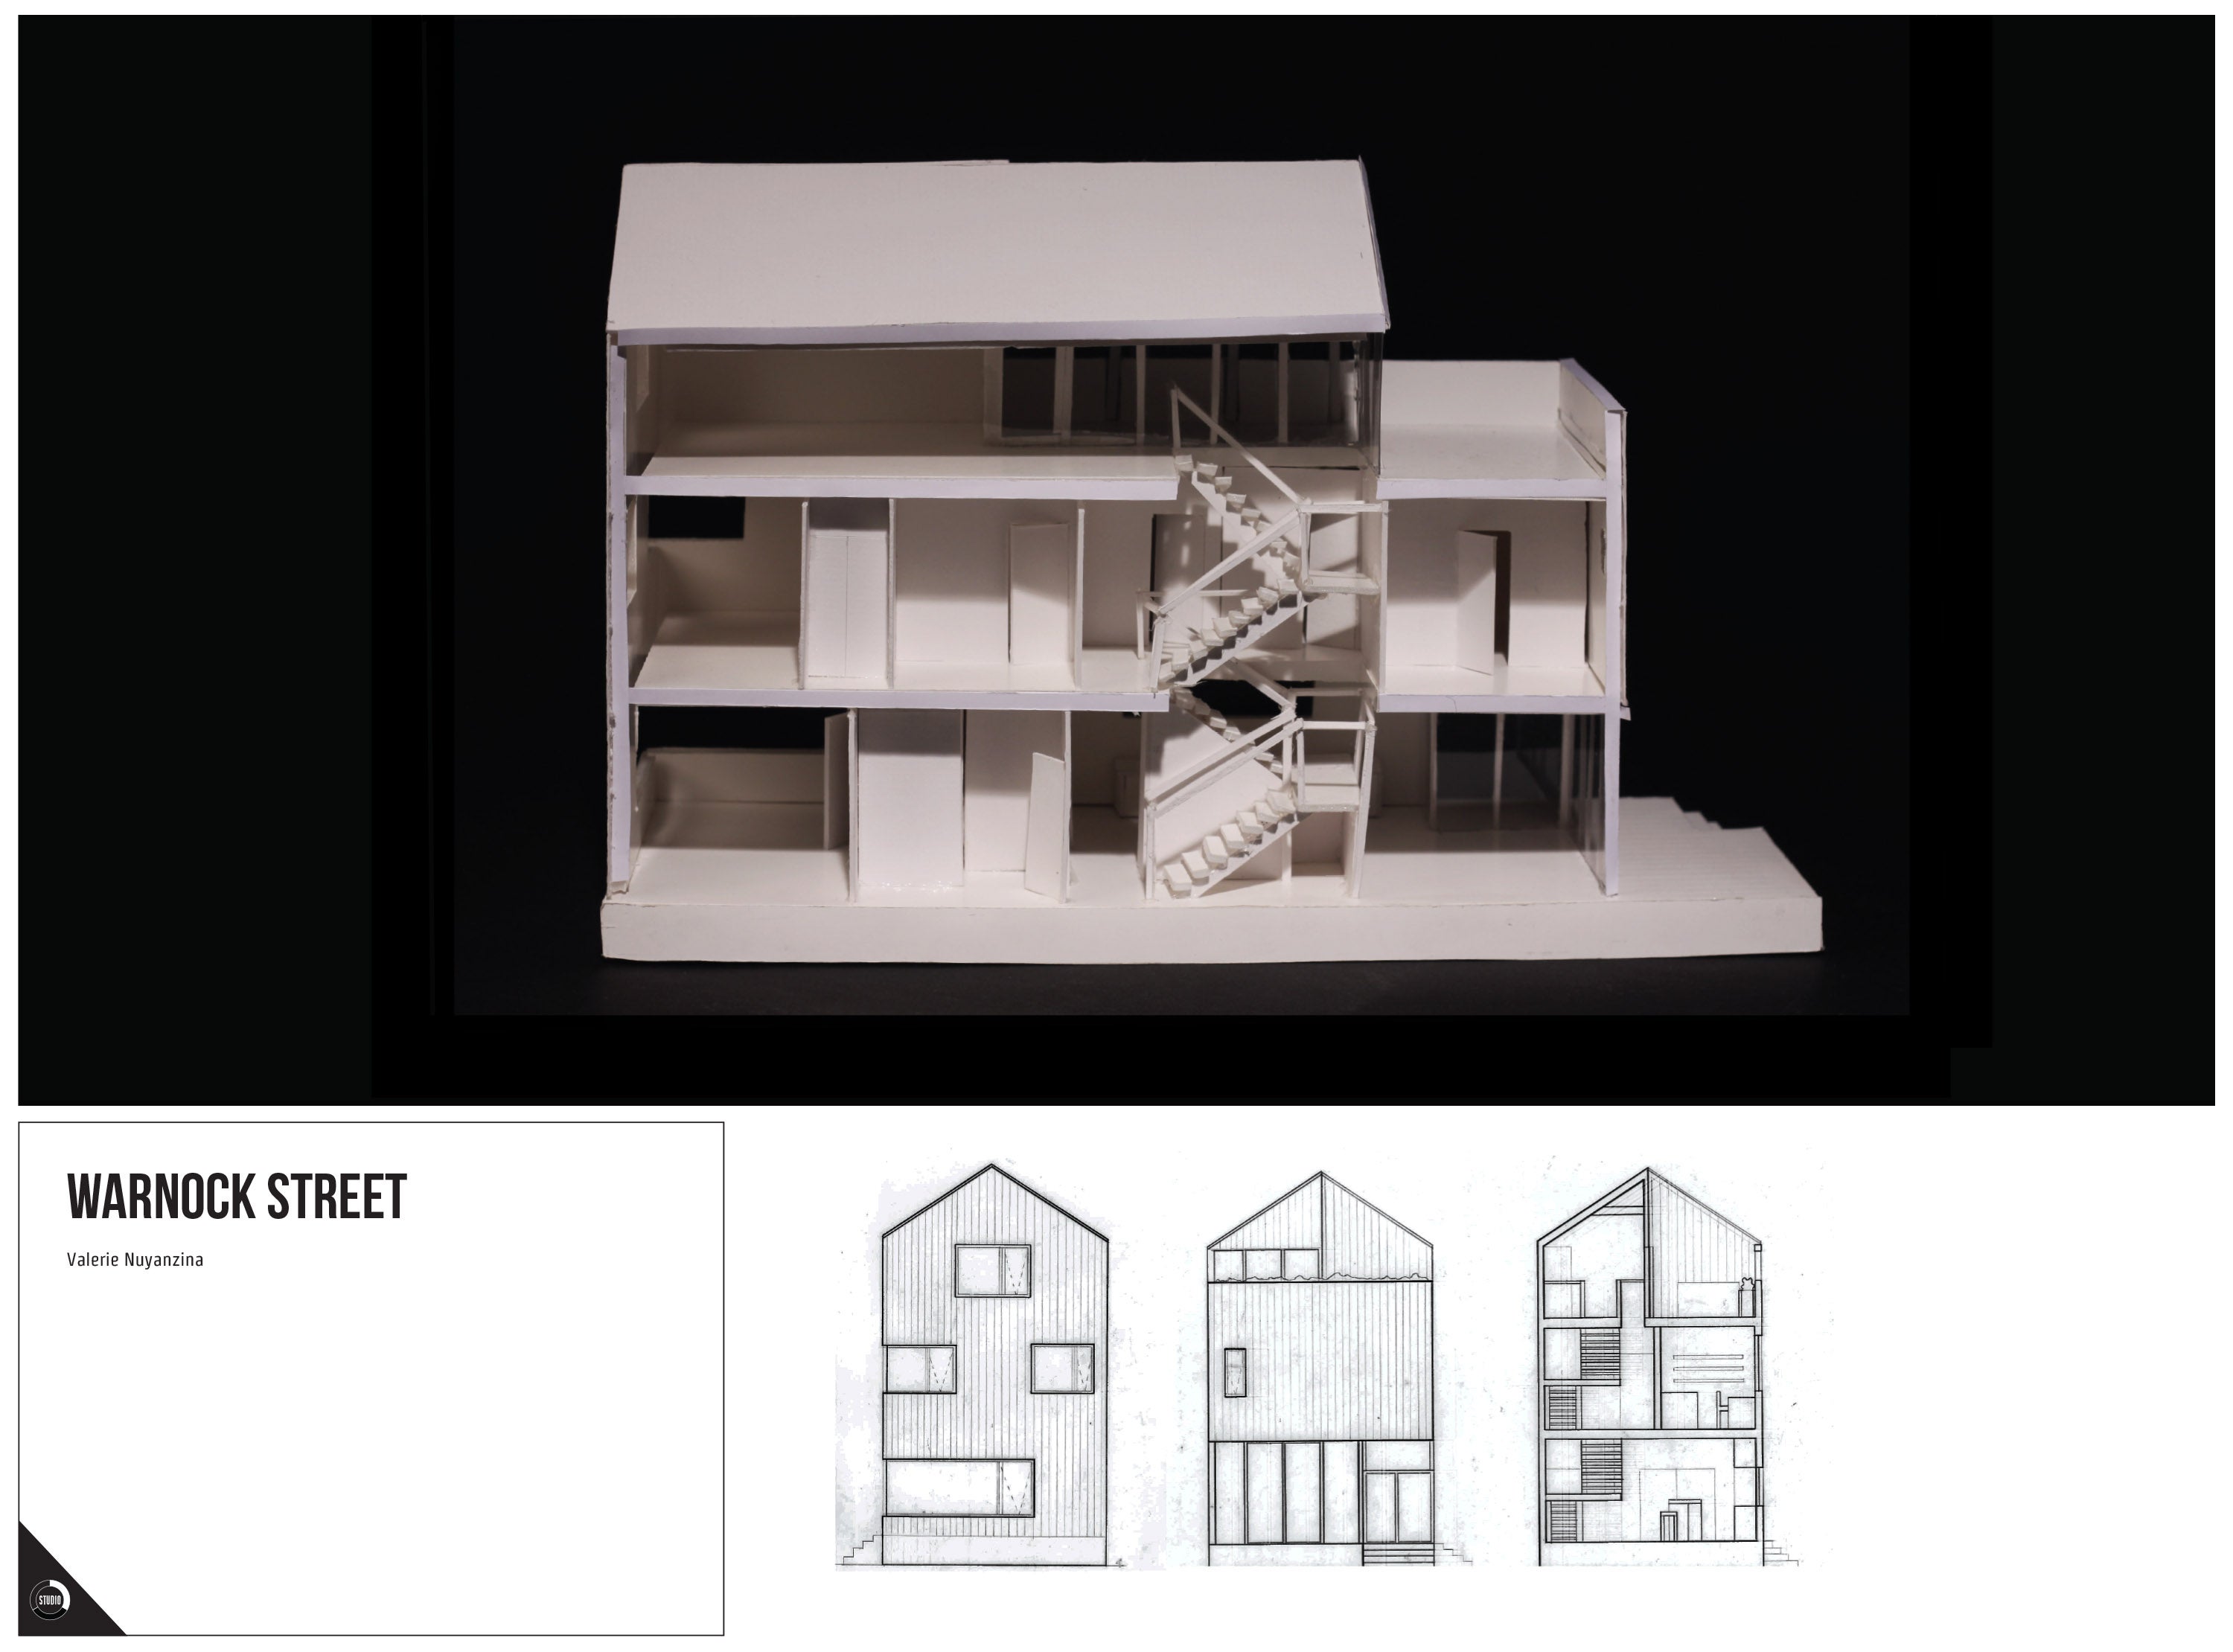 A presentation panel showcasing the townhouse physical model, as well as two elevation drawings of the design. 